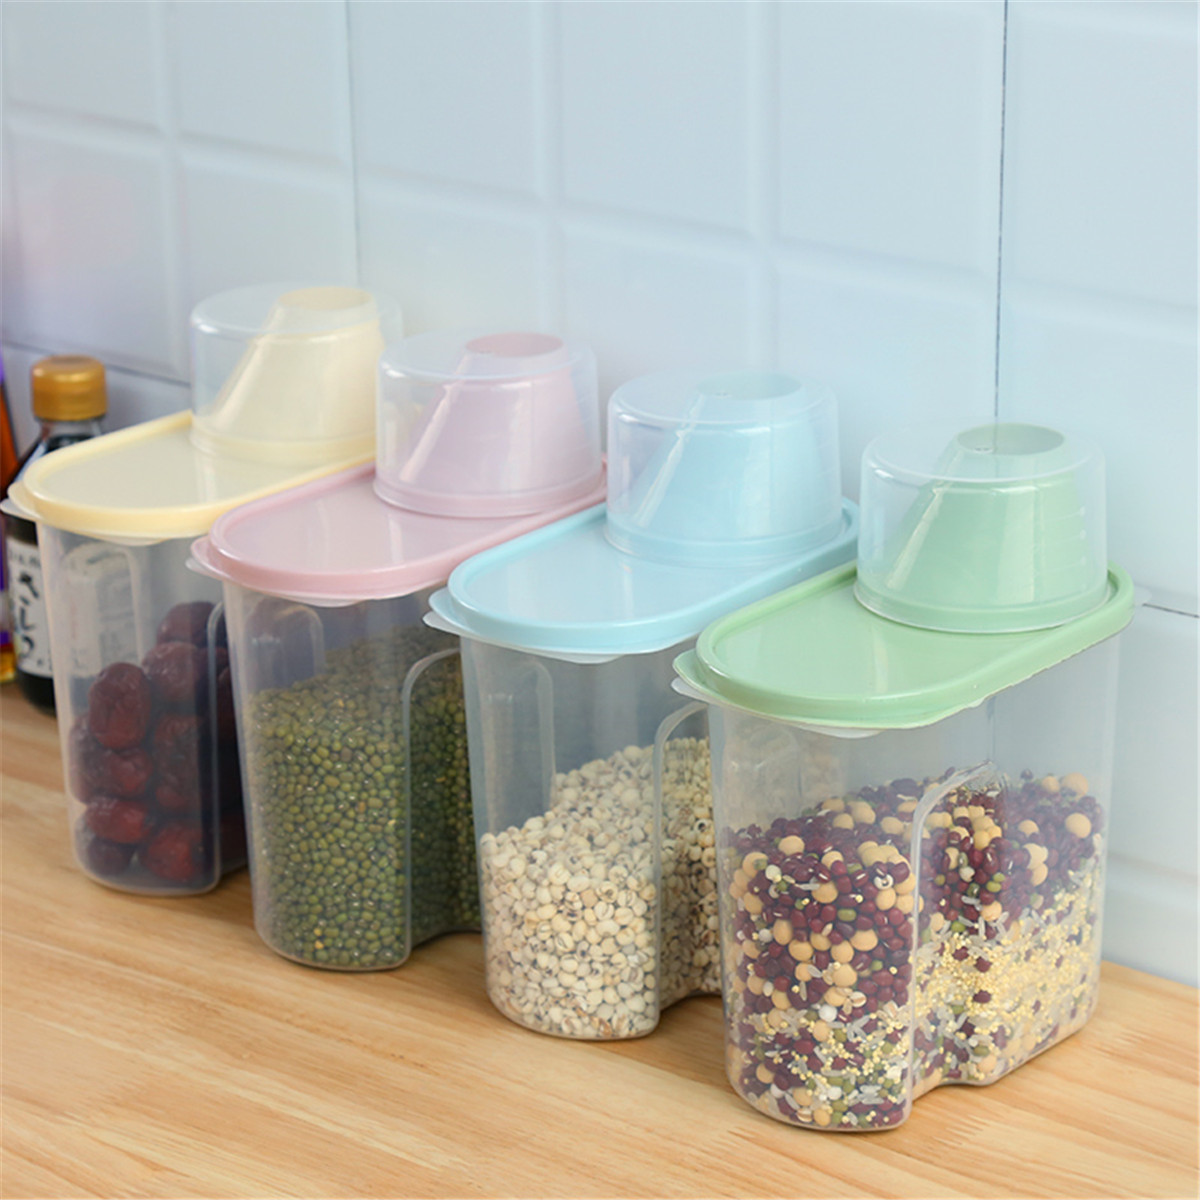 4Pcs-Cereal-Storage-Box-Plastic-Rice-Container-Food-Sealed-Jar-Cans-Kitchen-Grain-Dried-Fruit-Snacks-1730653-6